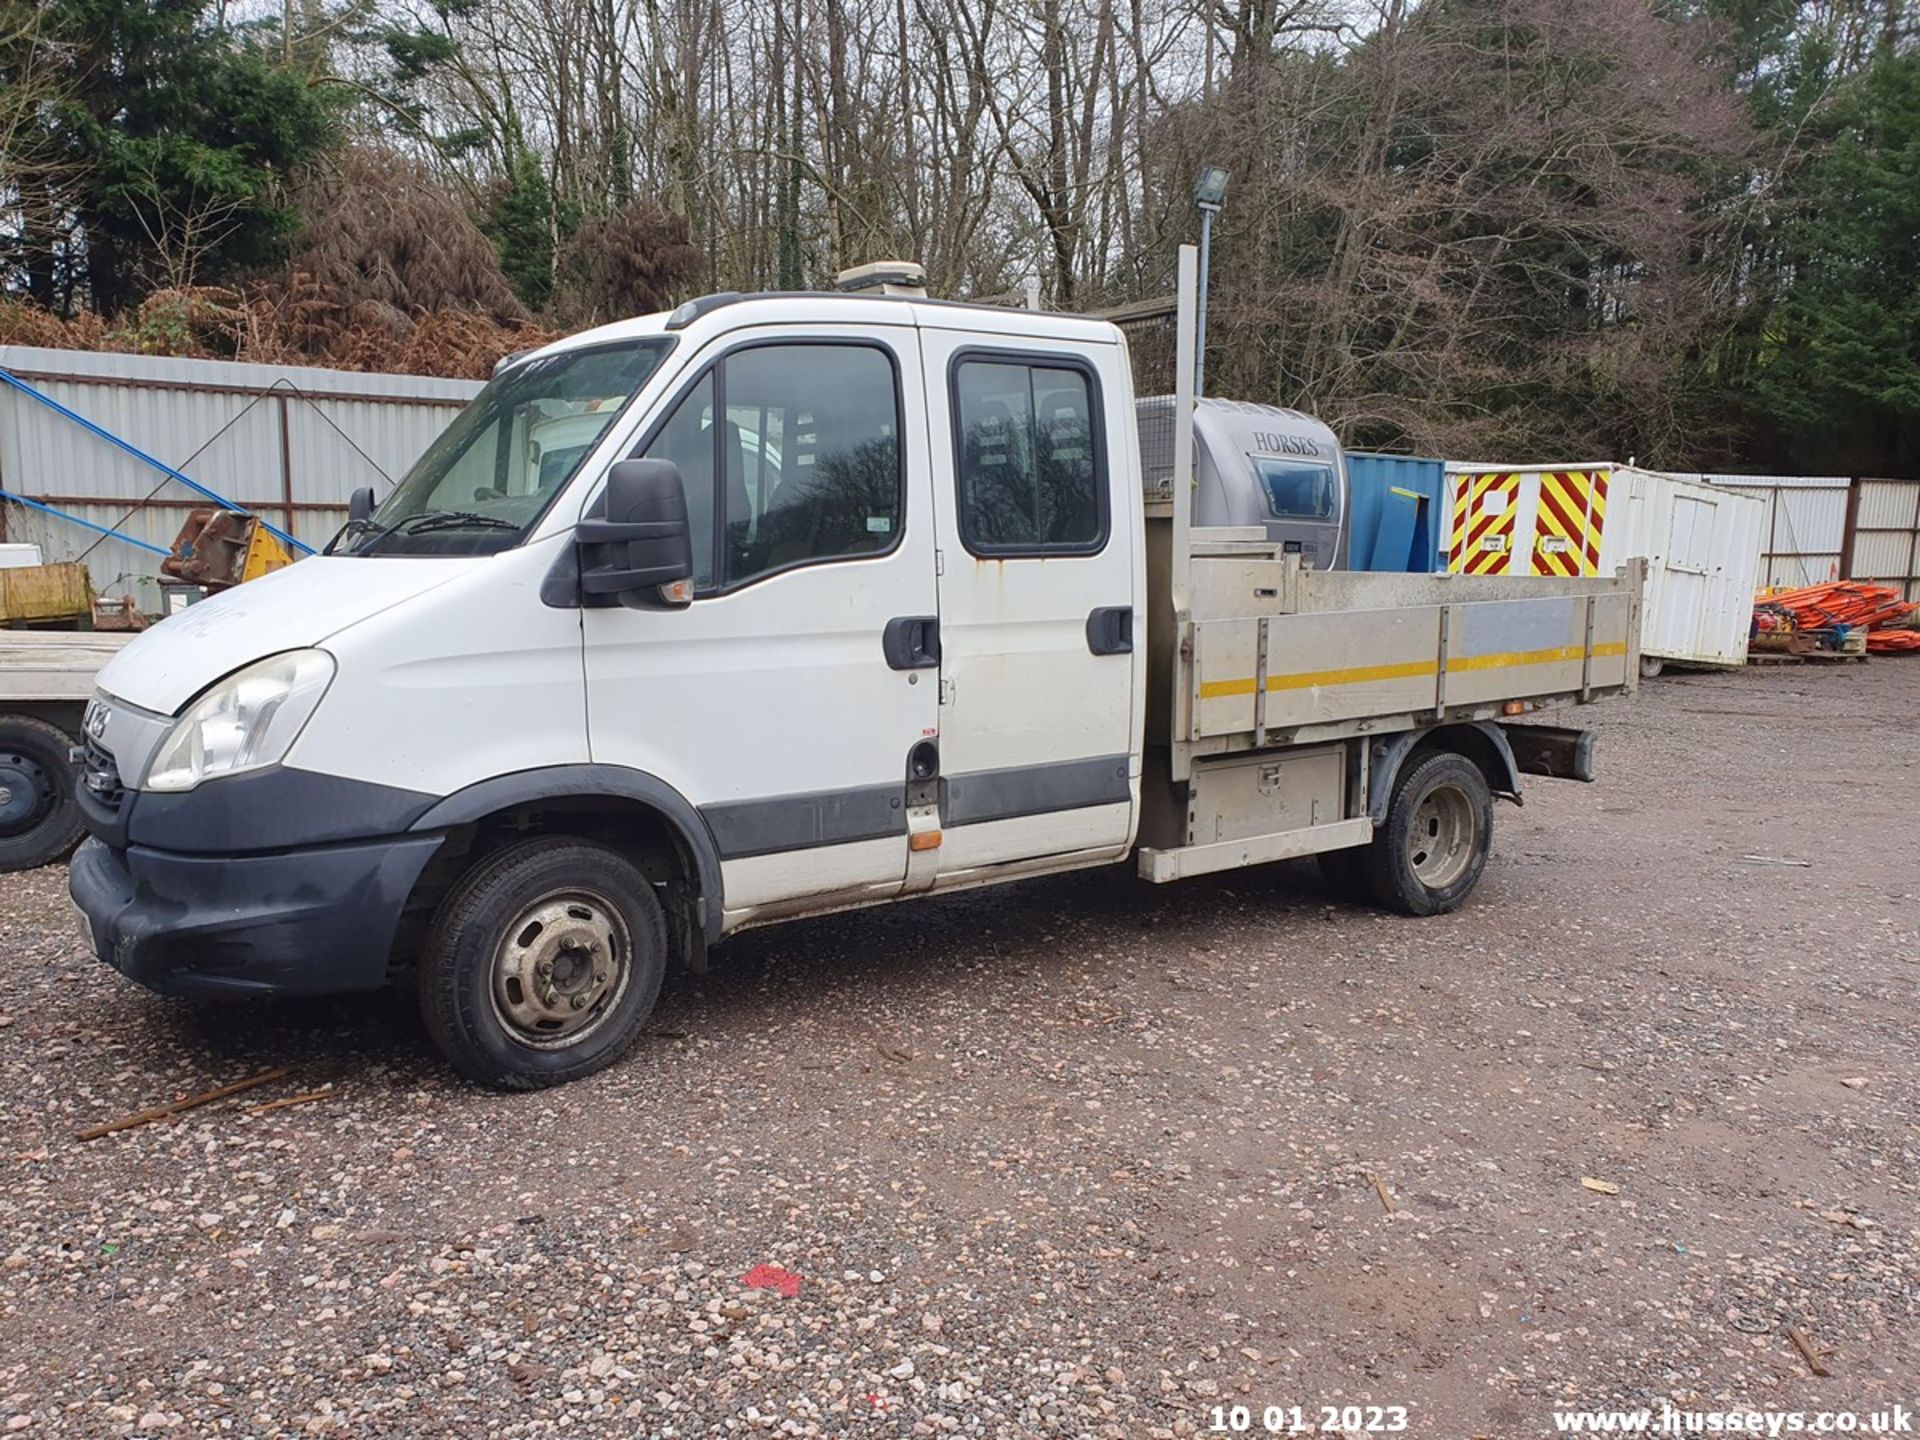 14/64 IVECO DAILY 50C15 - 2998cc 4dr Tipper (White, 108k) - Image 8 of 26